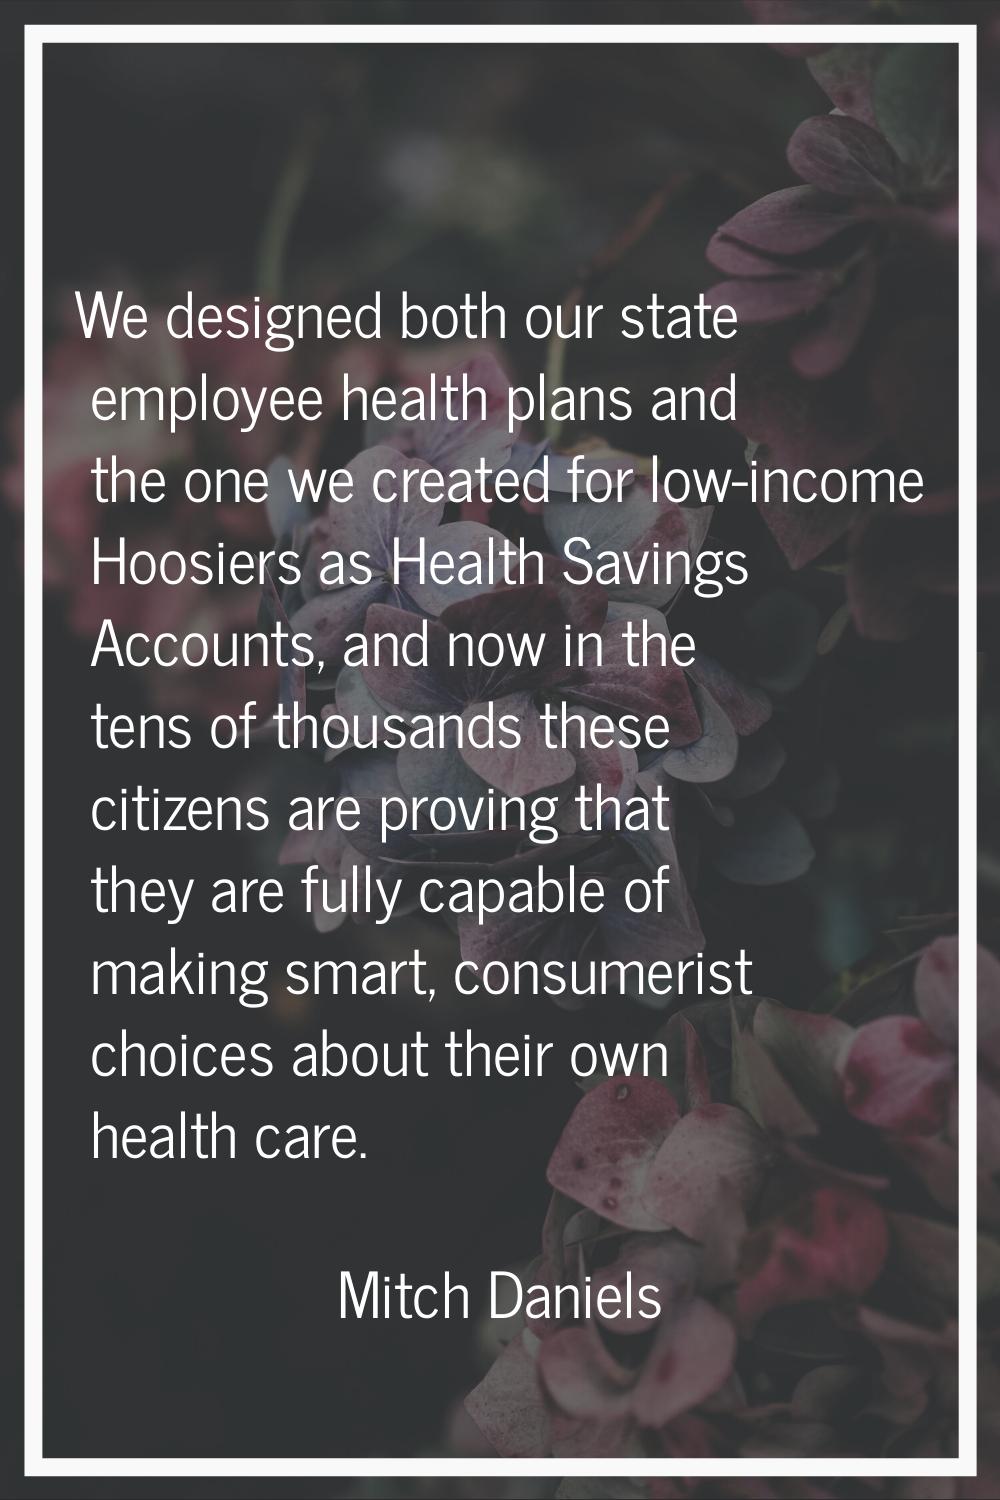 We designed both our state employee health plans and the one we created for low-income Hoosiers as 